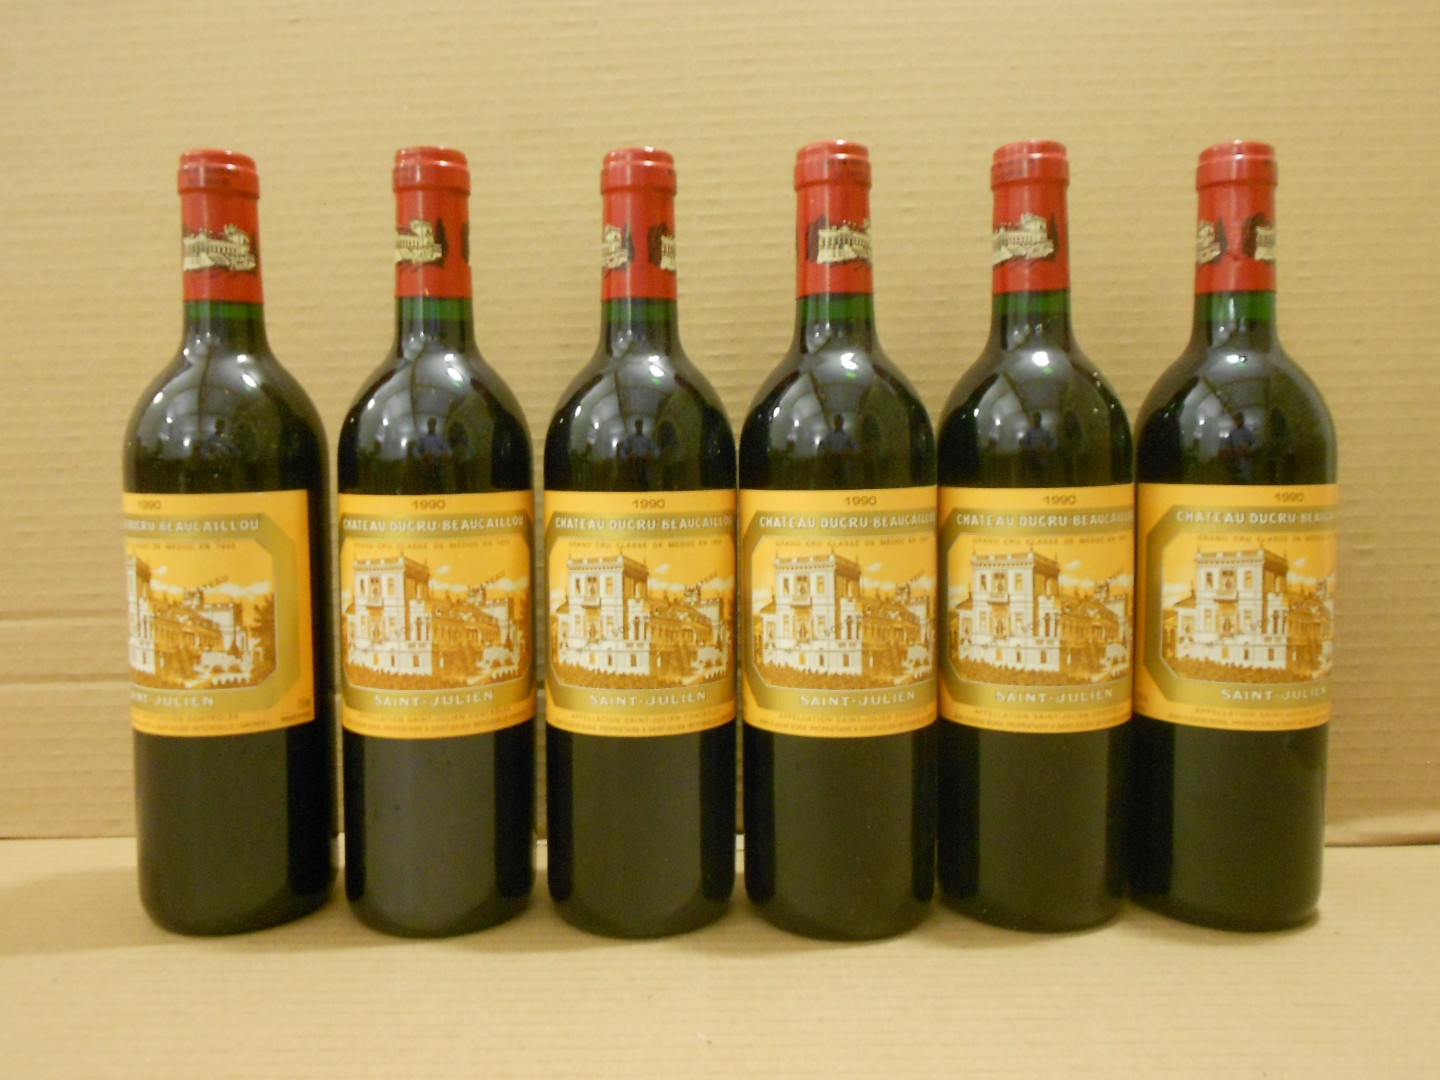 Chateau Ducru Beaucaillou, St Julien 2eme Cru 1990, twelve bottles. Removed from a college cellar - Image 2 of 2